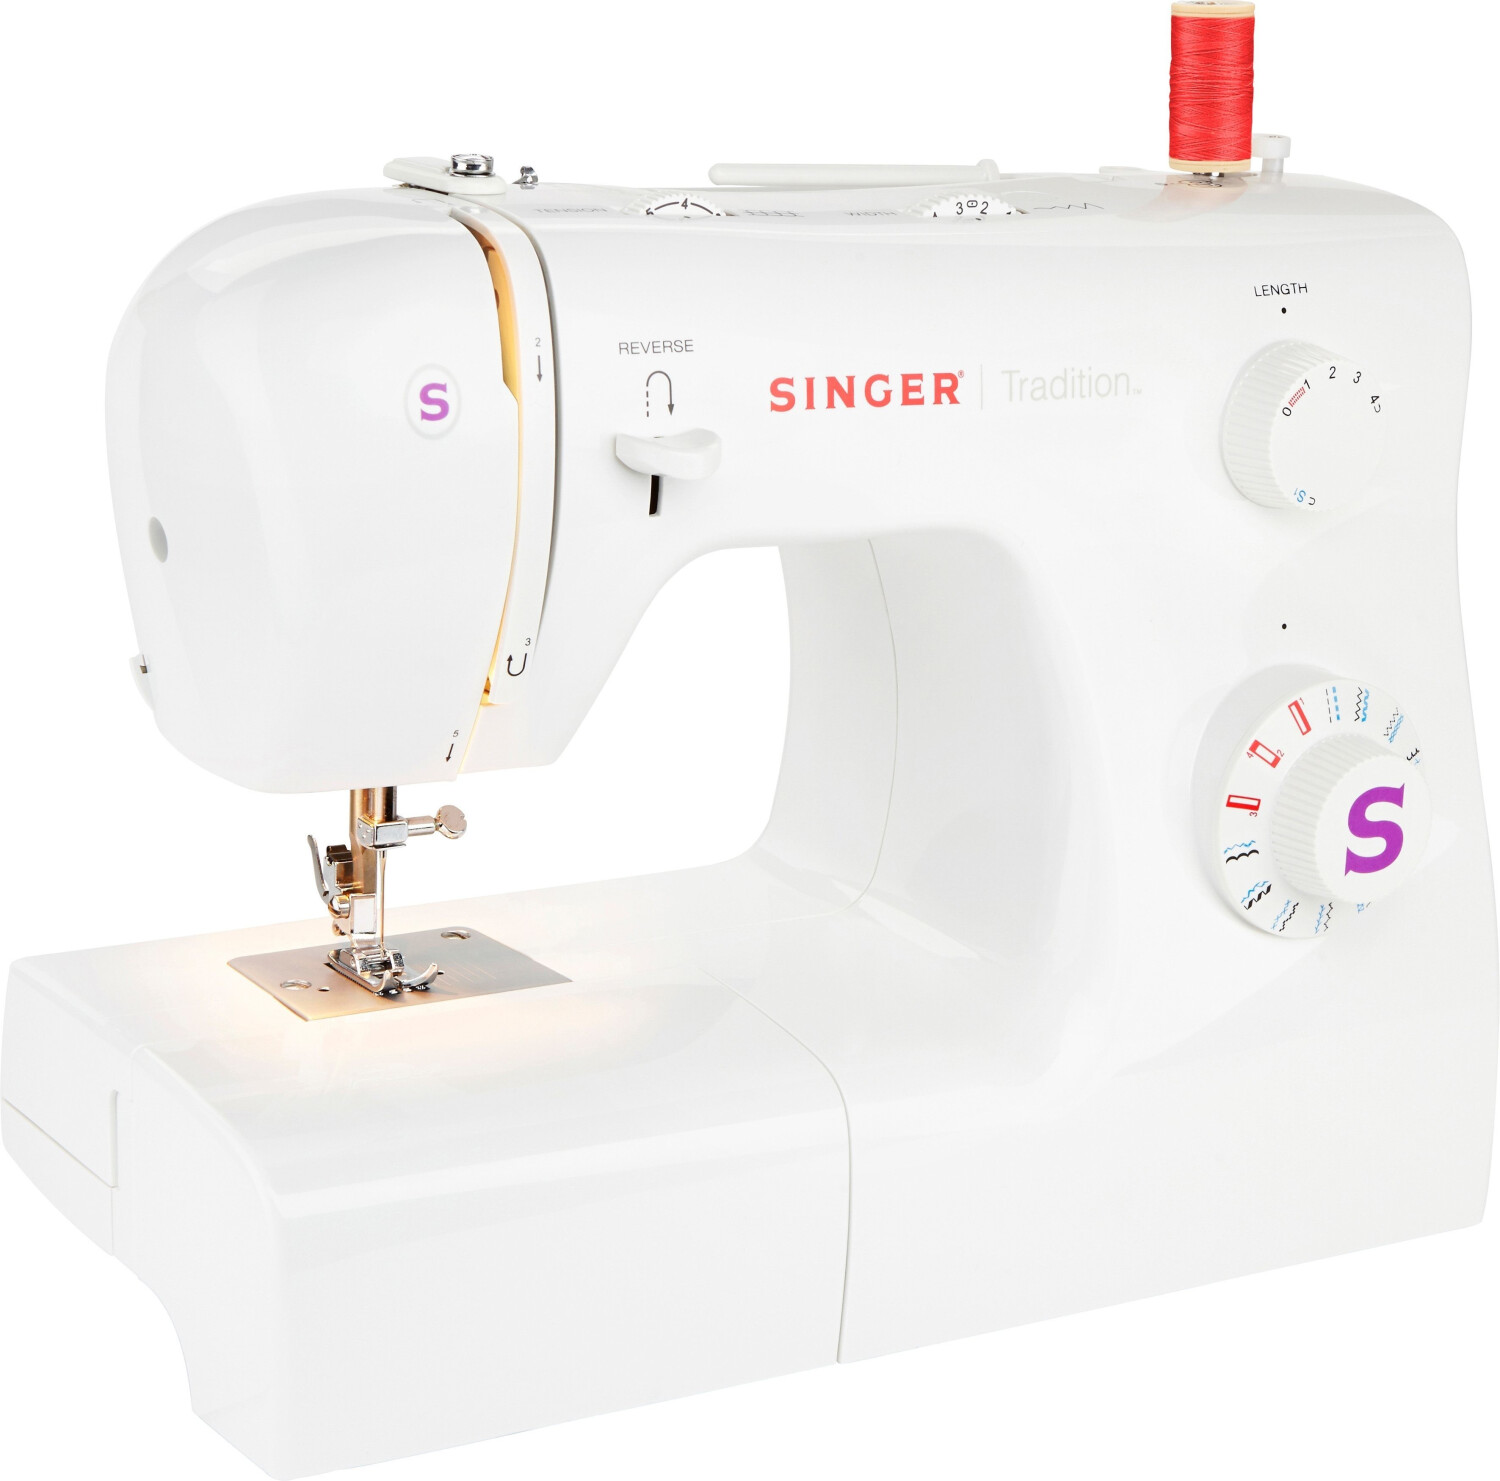 Sewing Machine Singer Tradition 2282 -- Excellent Condition, in Leicester,  Leicestershire